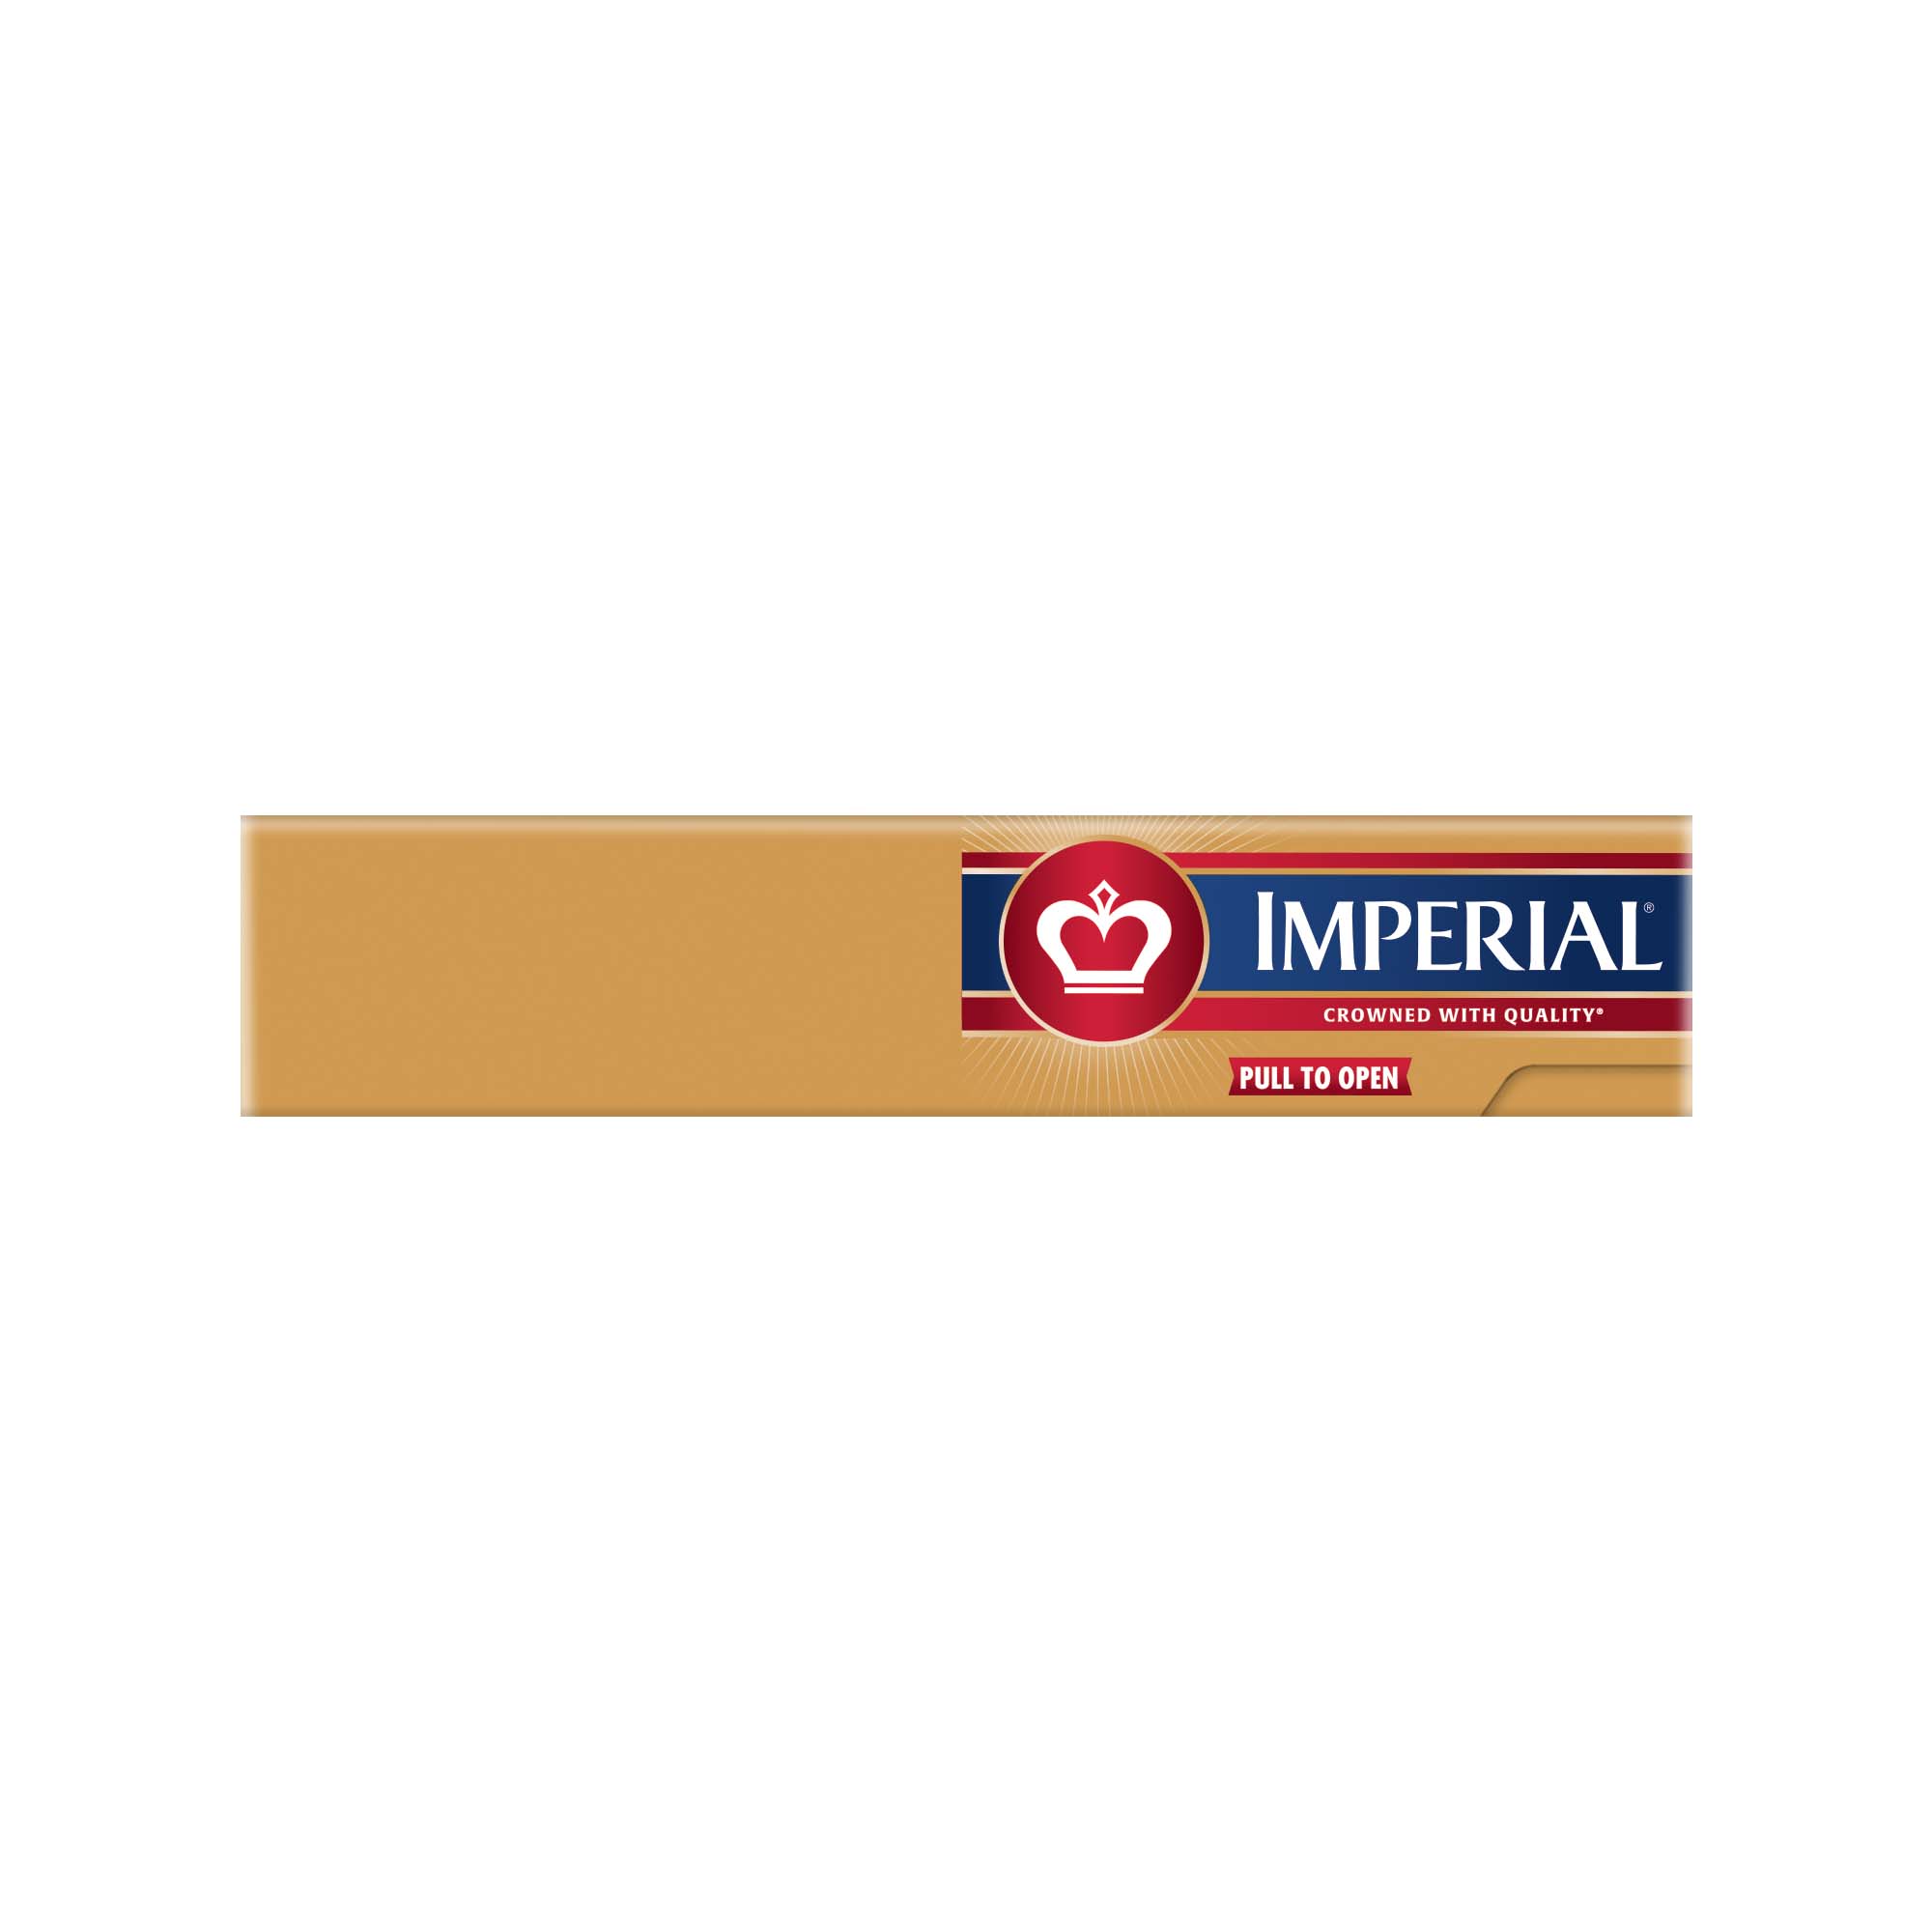 Imperial Vegetable Oil Spread, 16 oz Box, 4 Sticks (Refrigerated) - image 5 of 7